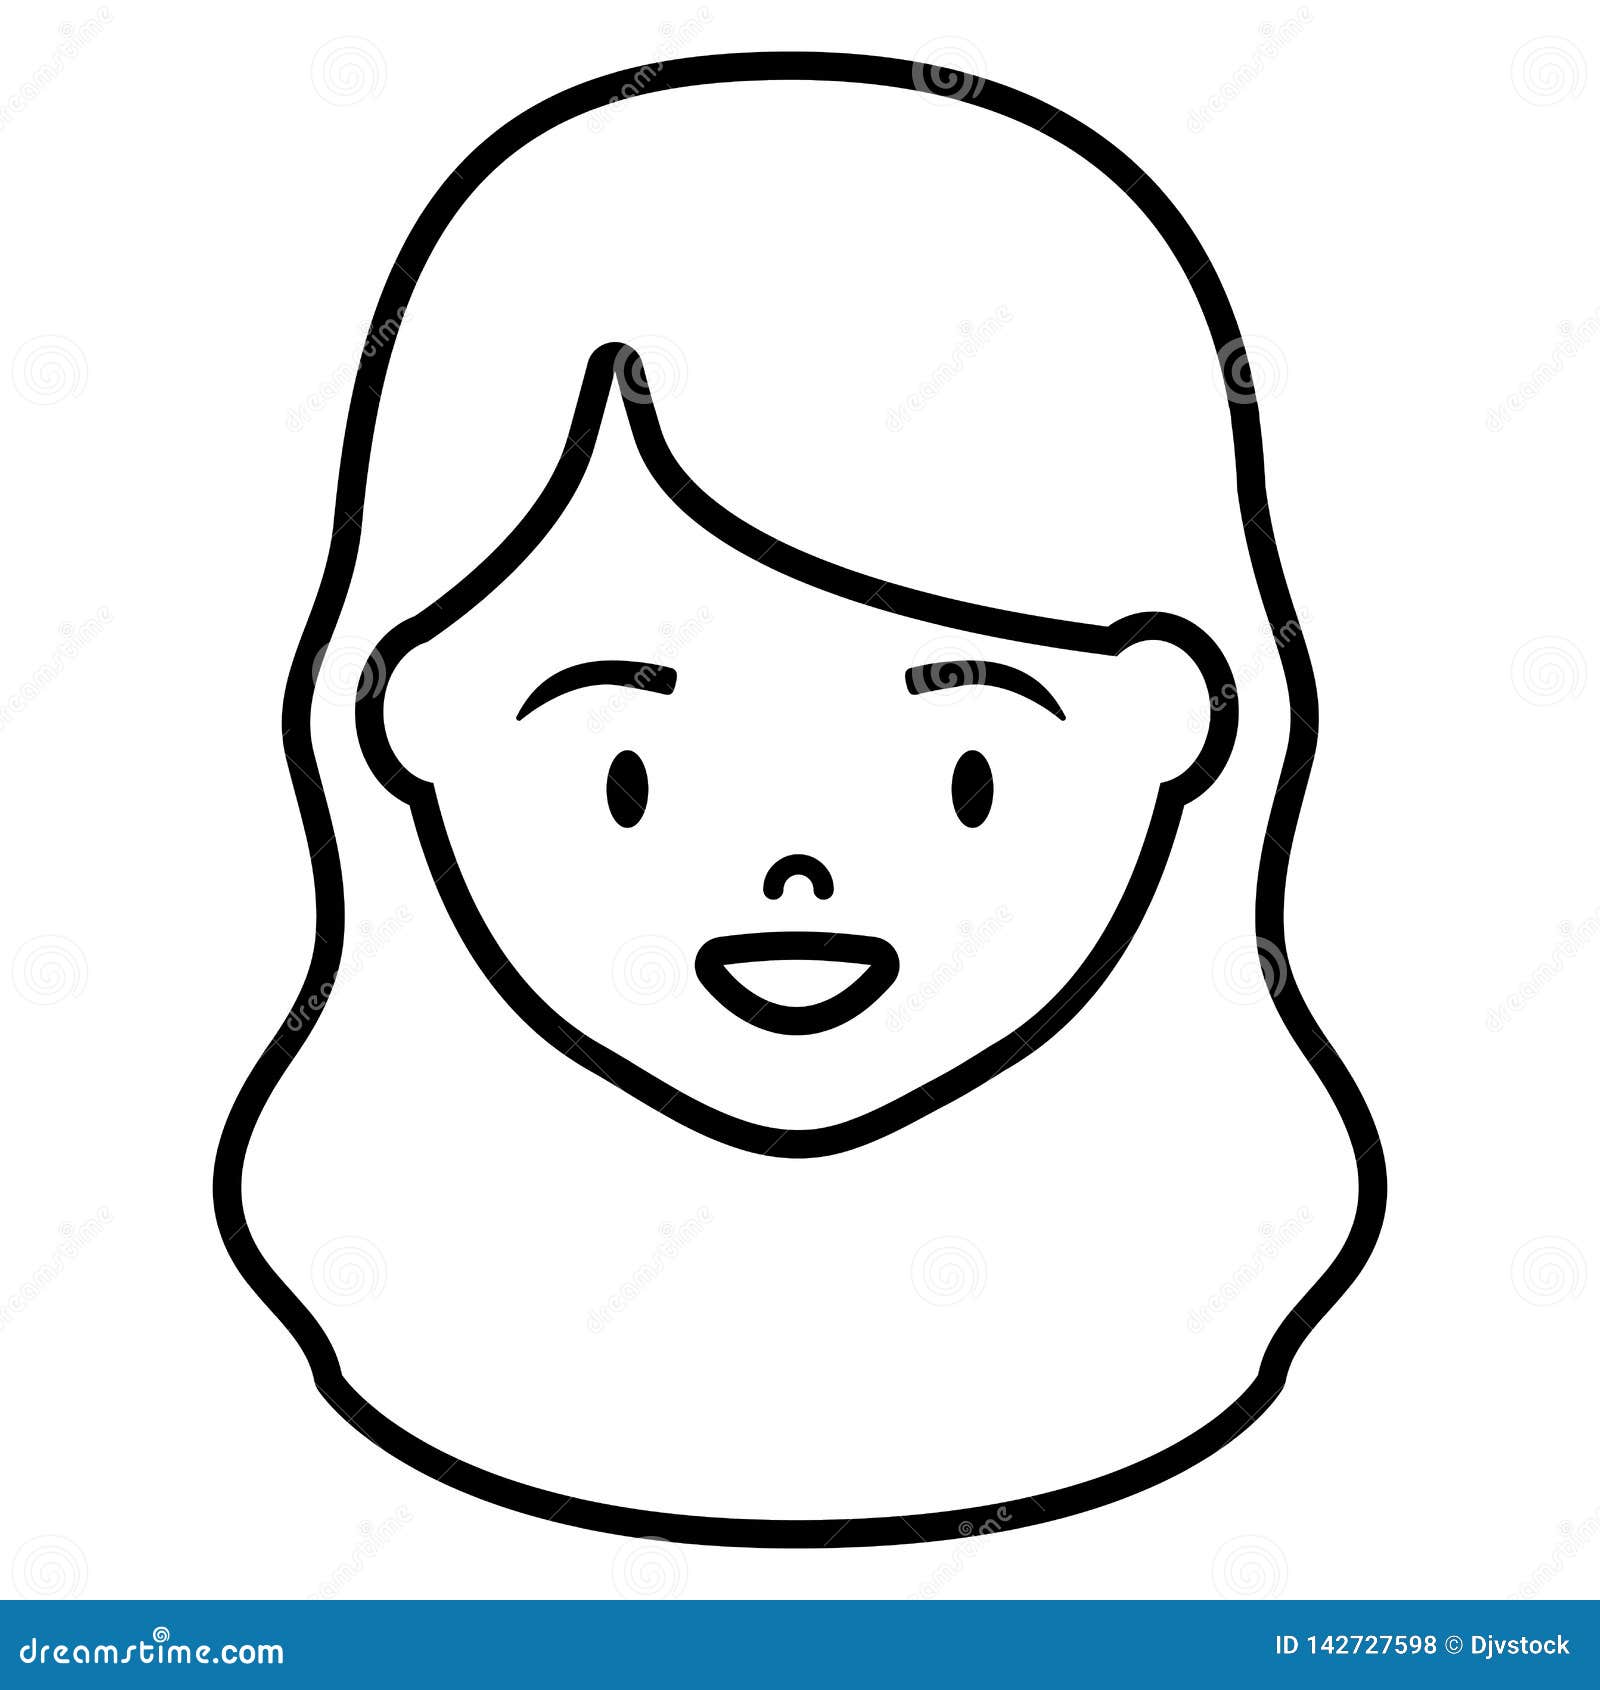 Cute and little girl head stock vector. Illustration of smile - 142727598